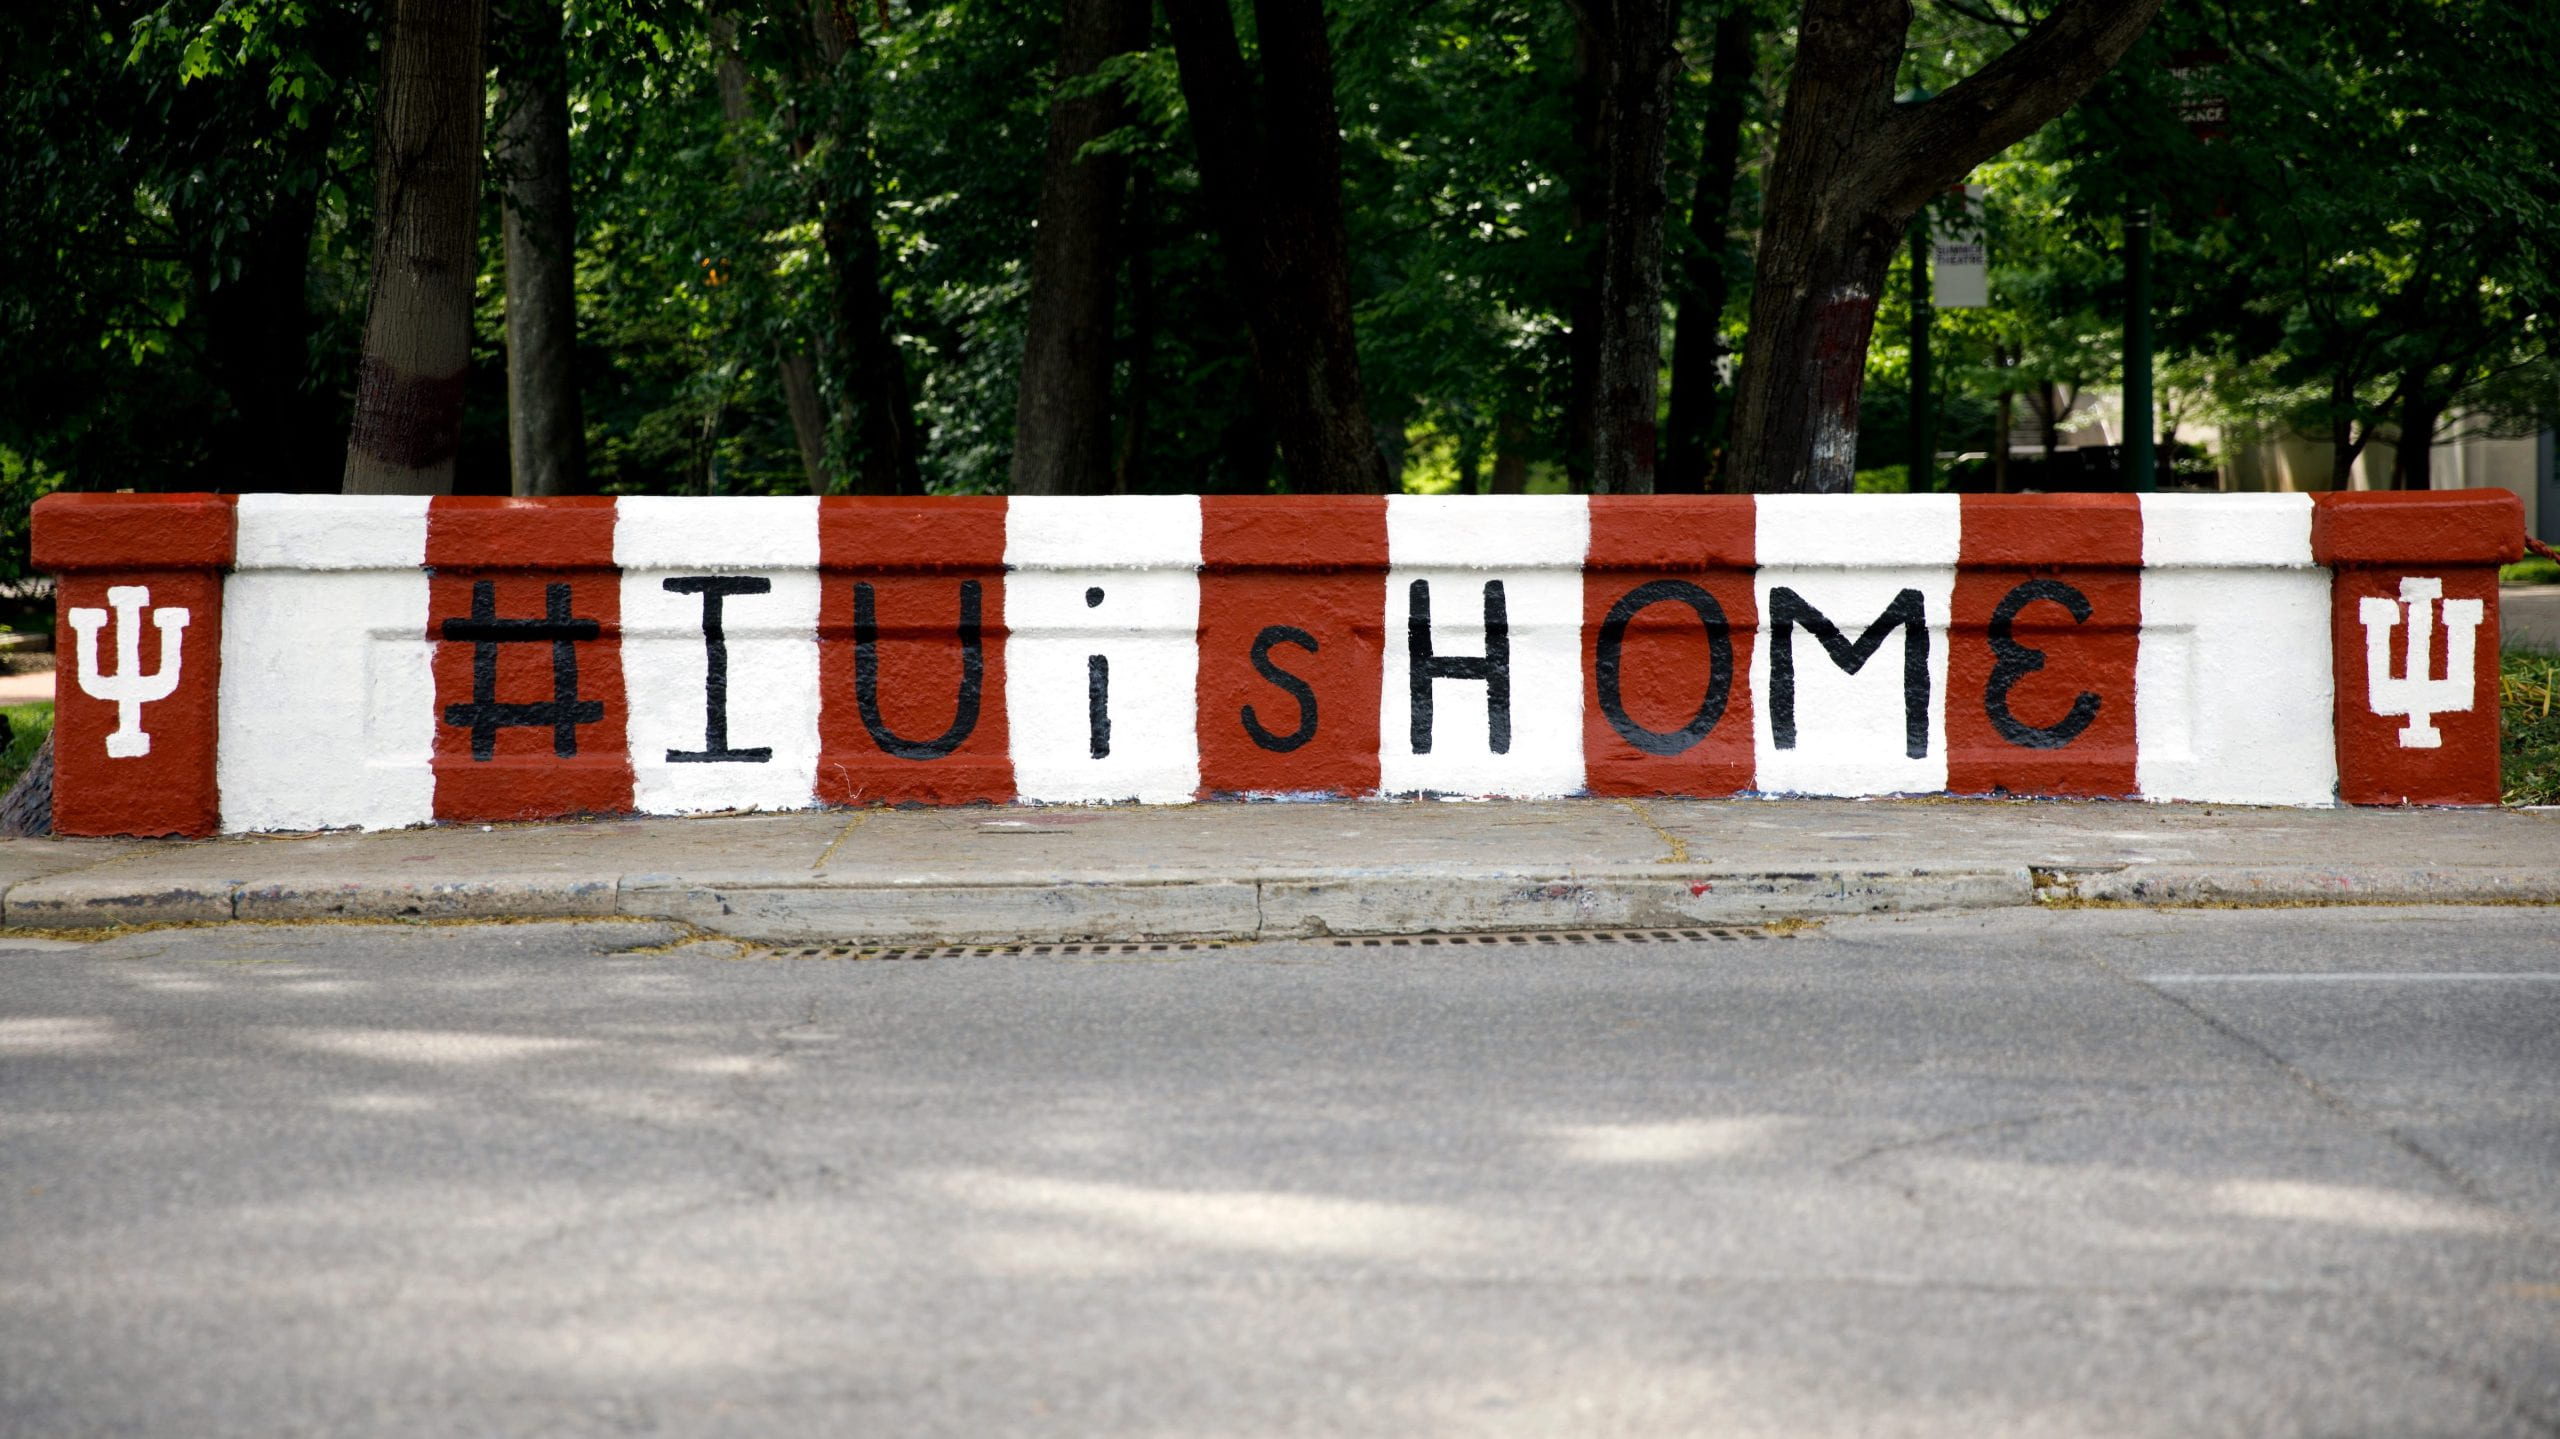 A bridge painted in cream and crimson with the text #IUisHOME painted in black letters, framed by white tridents